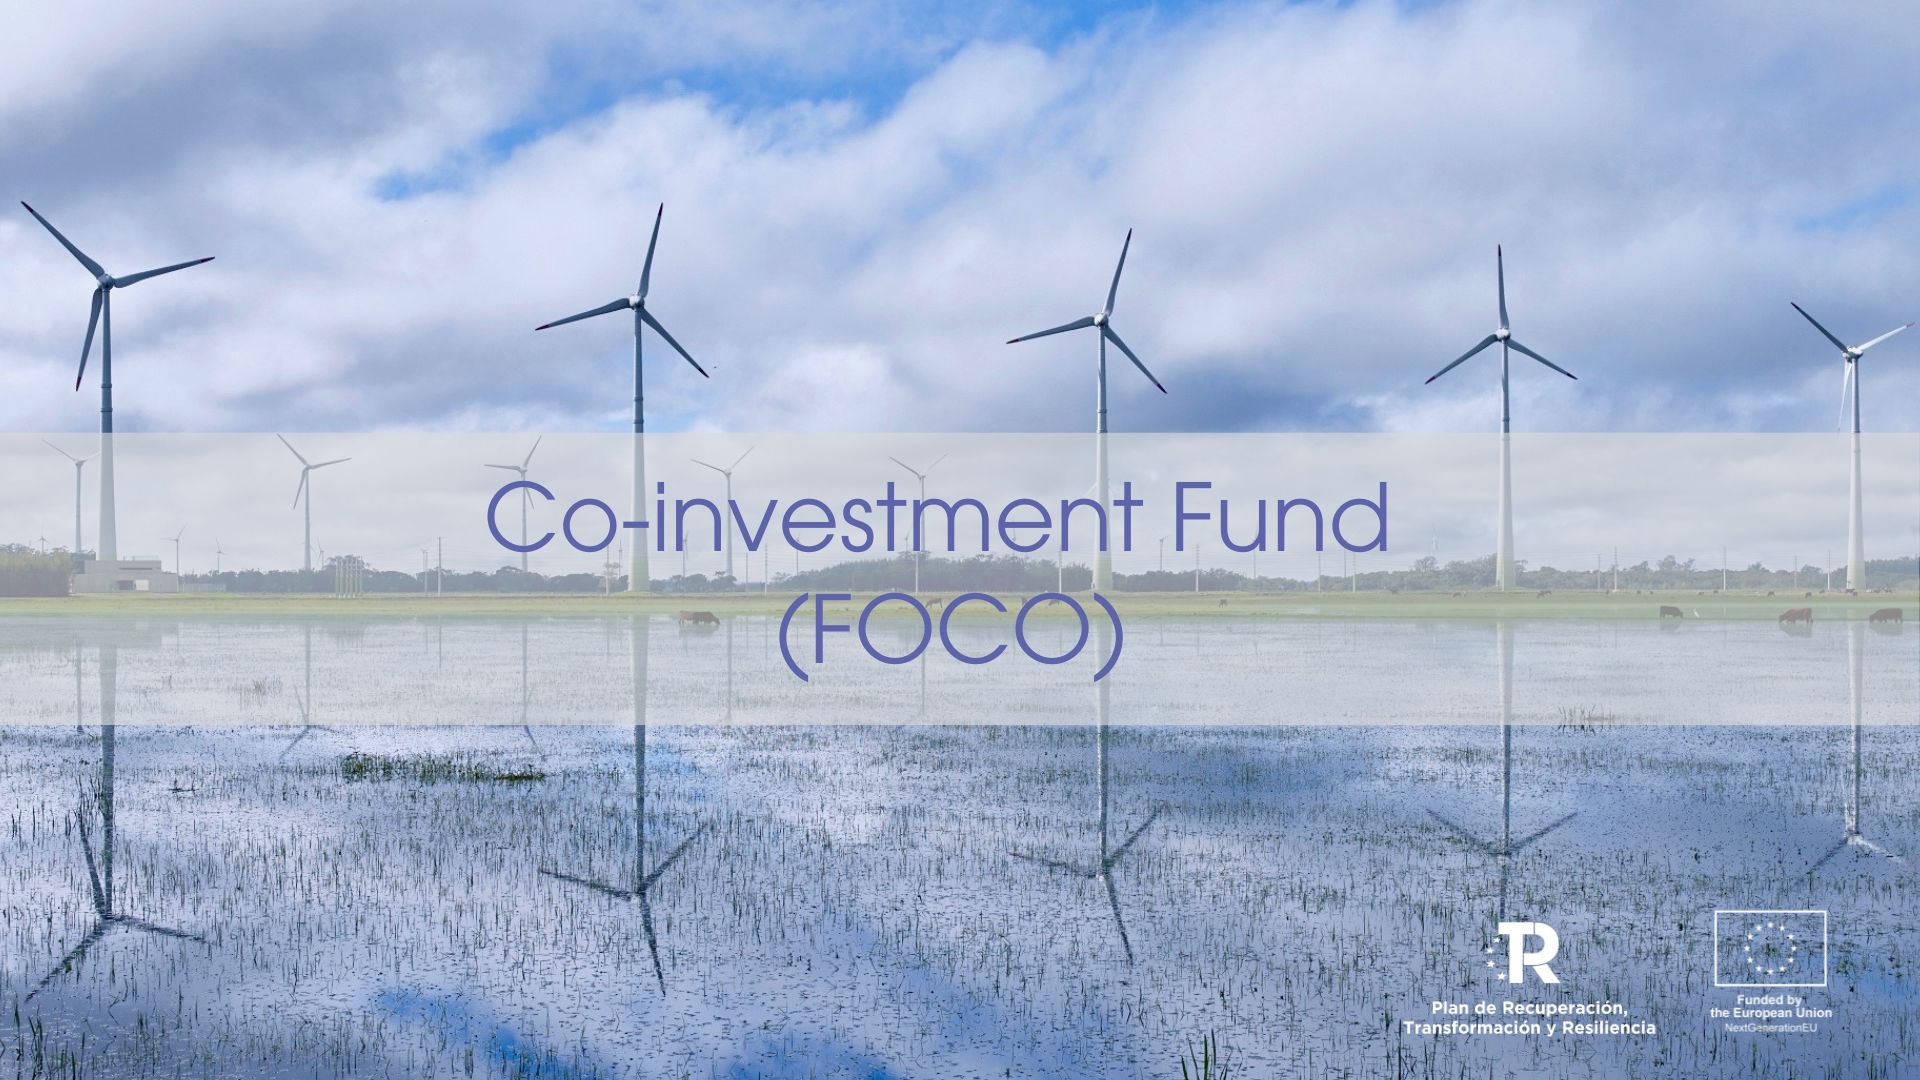 Wind farm. Promotional banner of Co-investment Fund (FOCO)